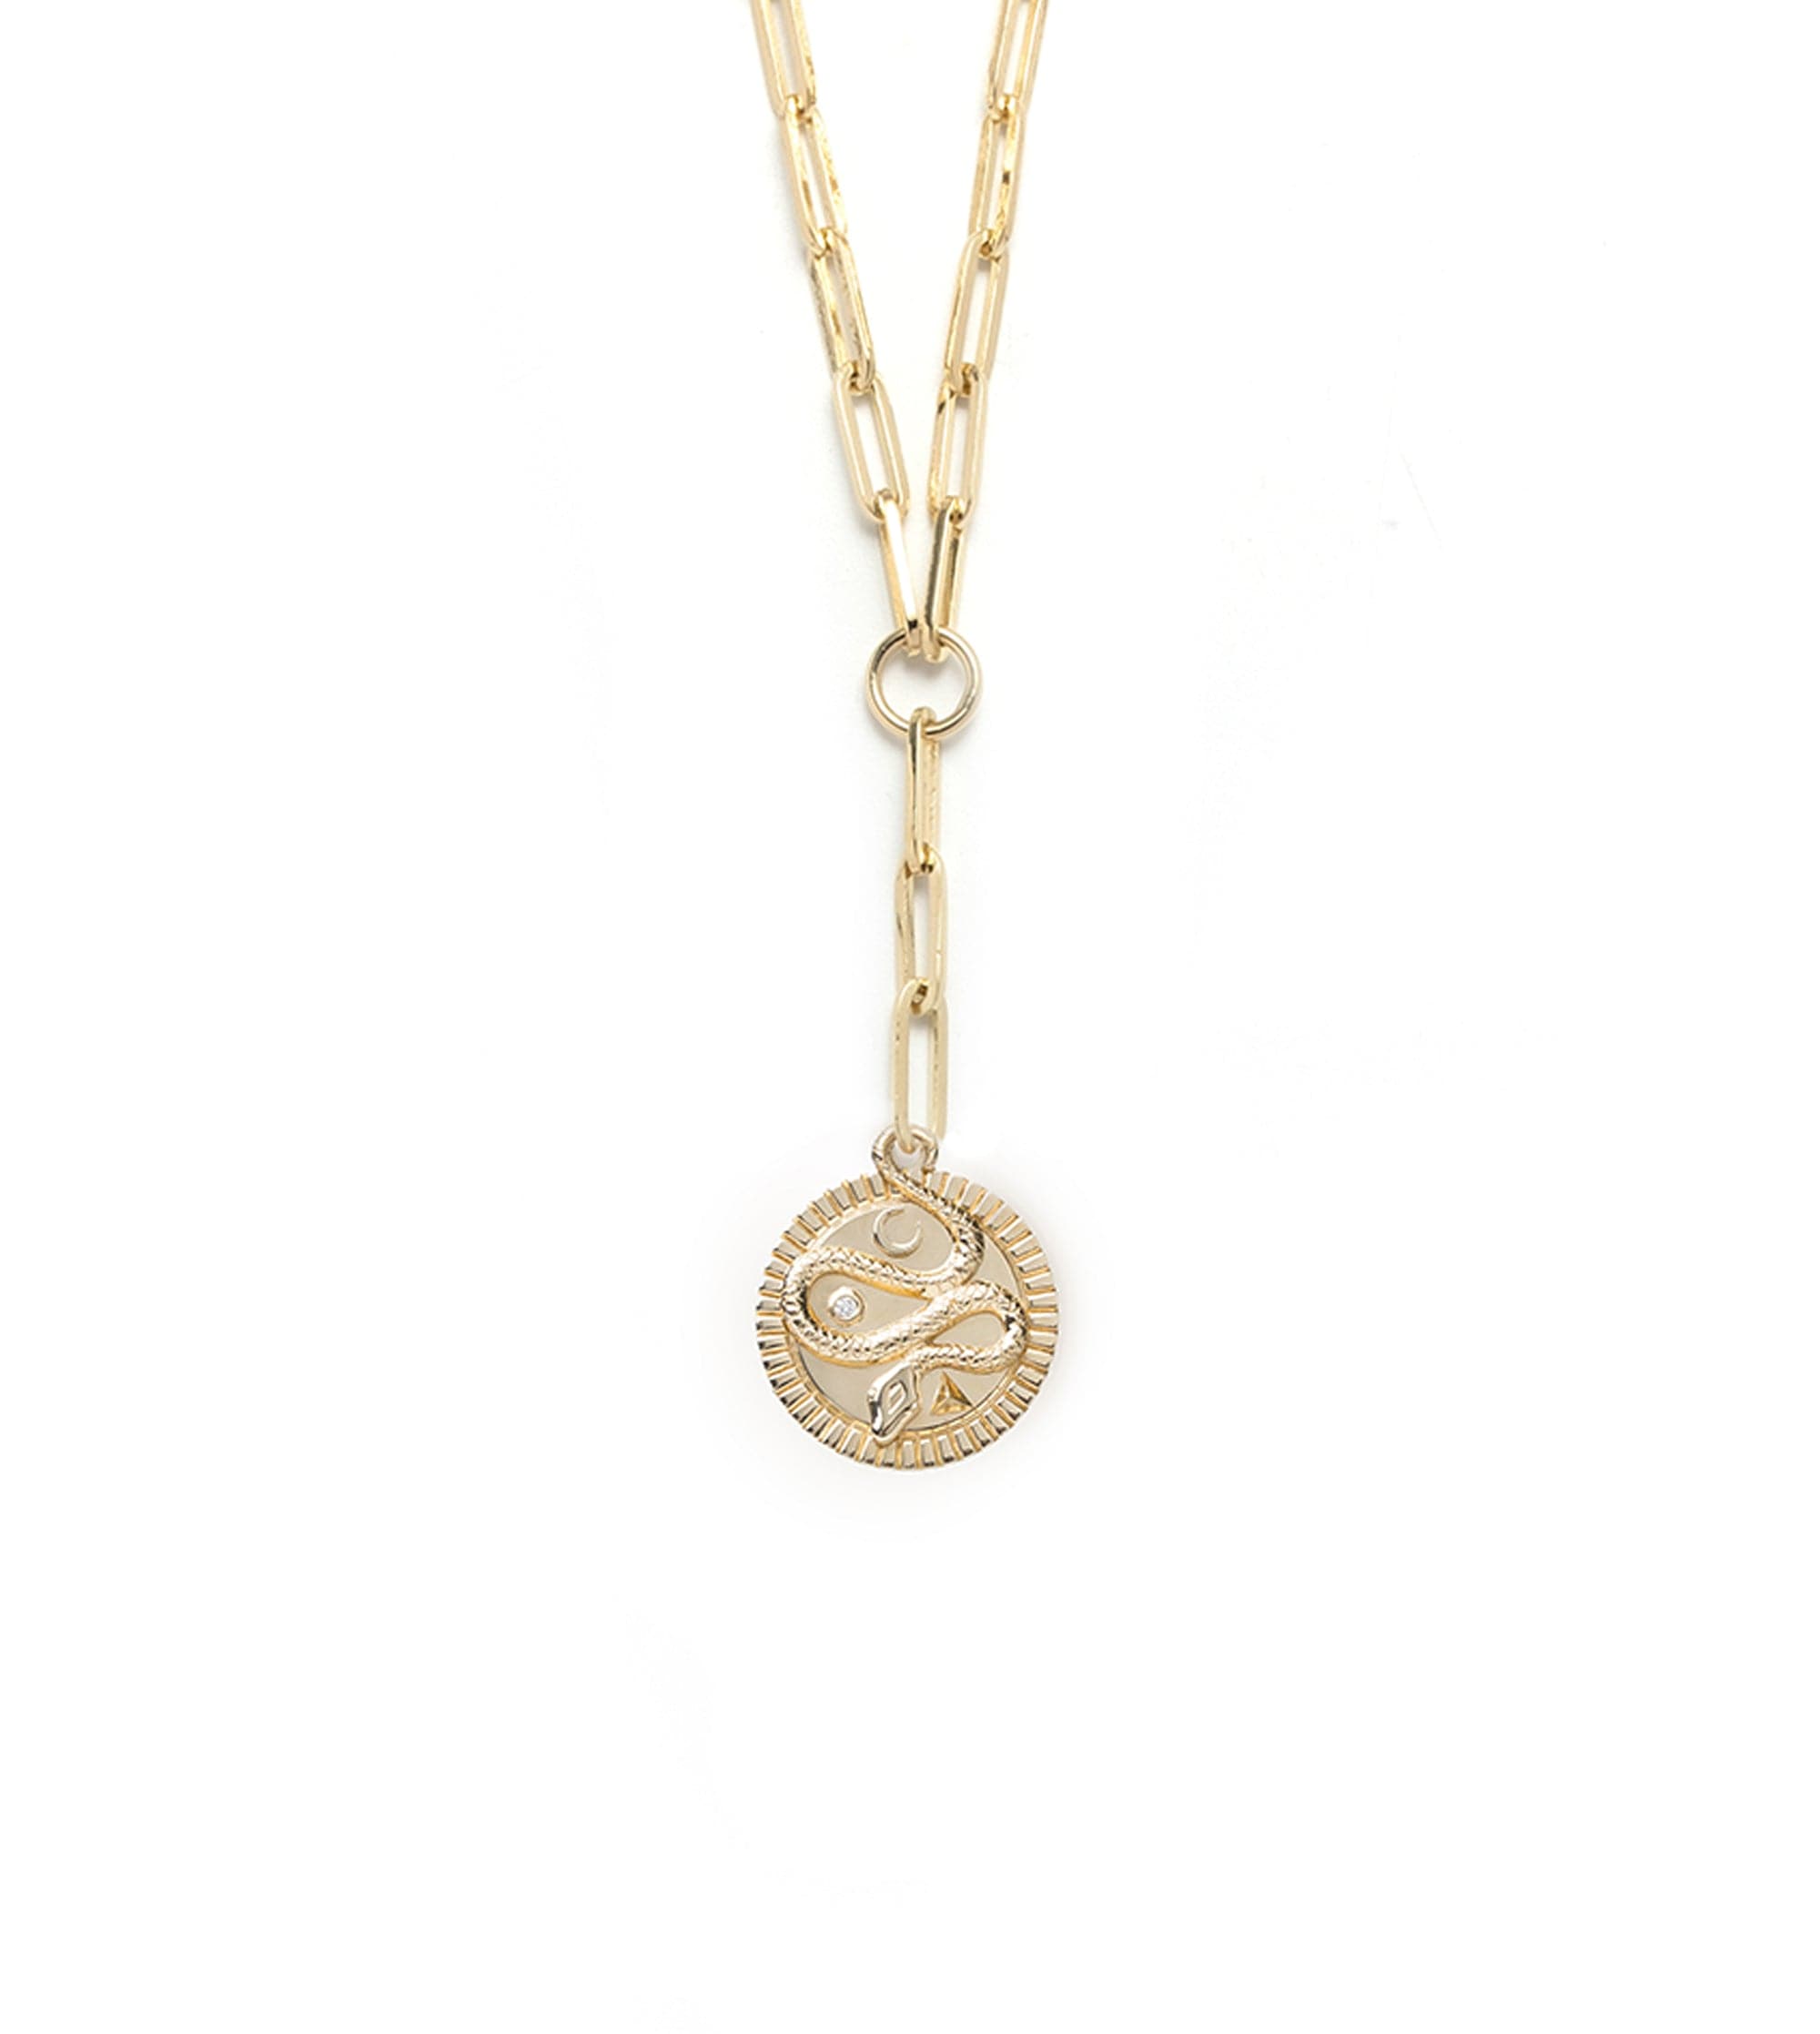 Wholeness : Classic Fob Clip Extension Chain Necklace